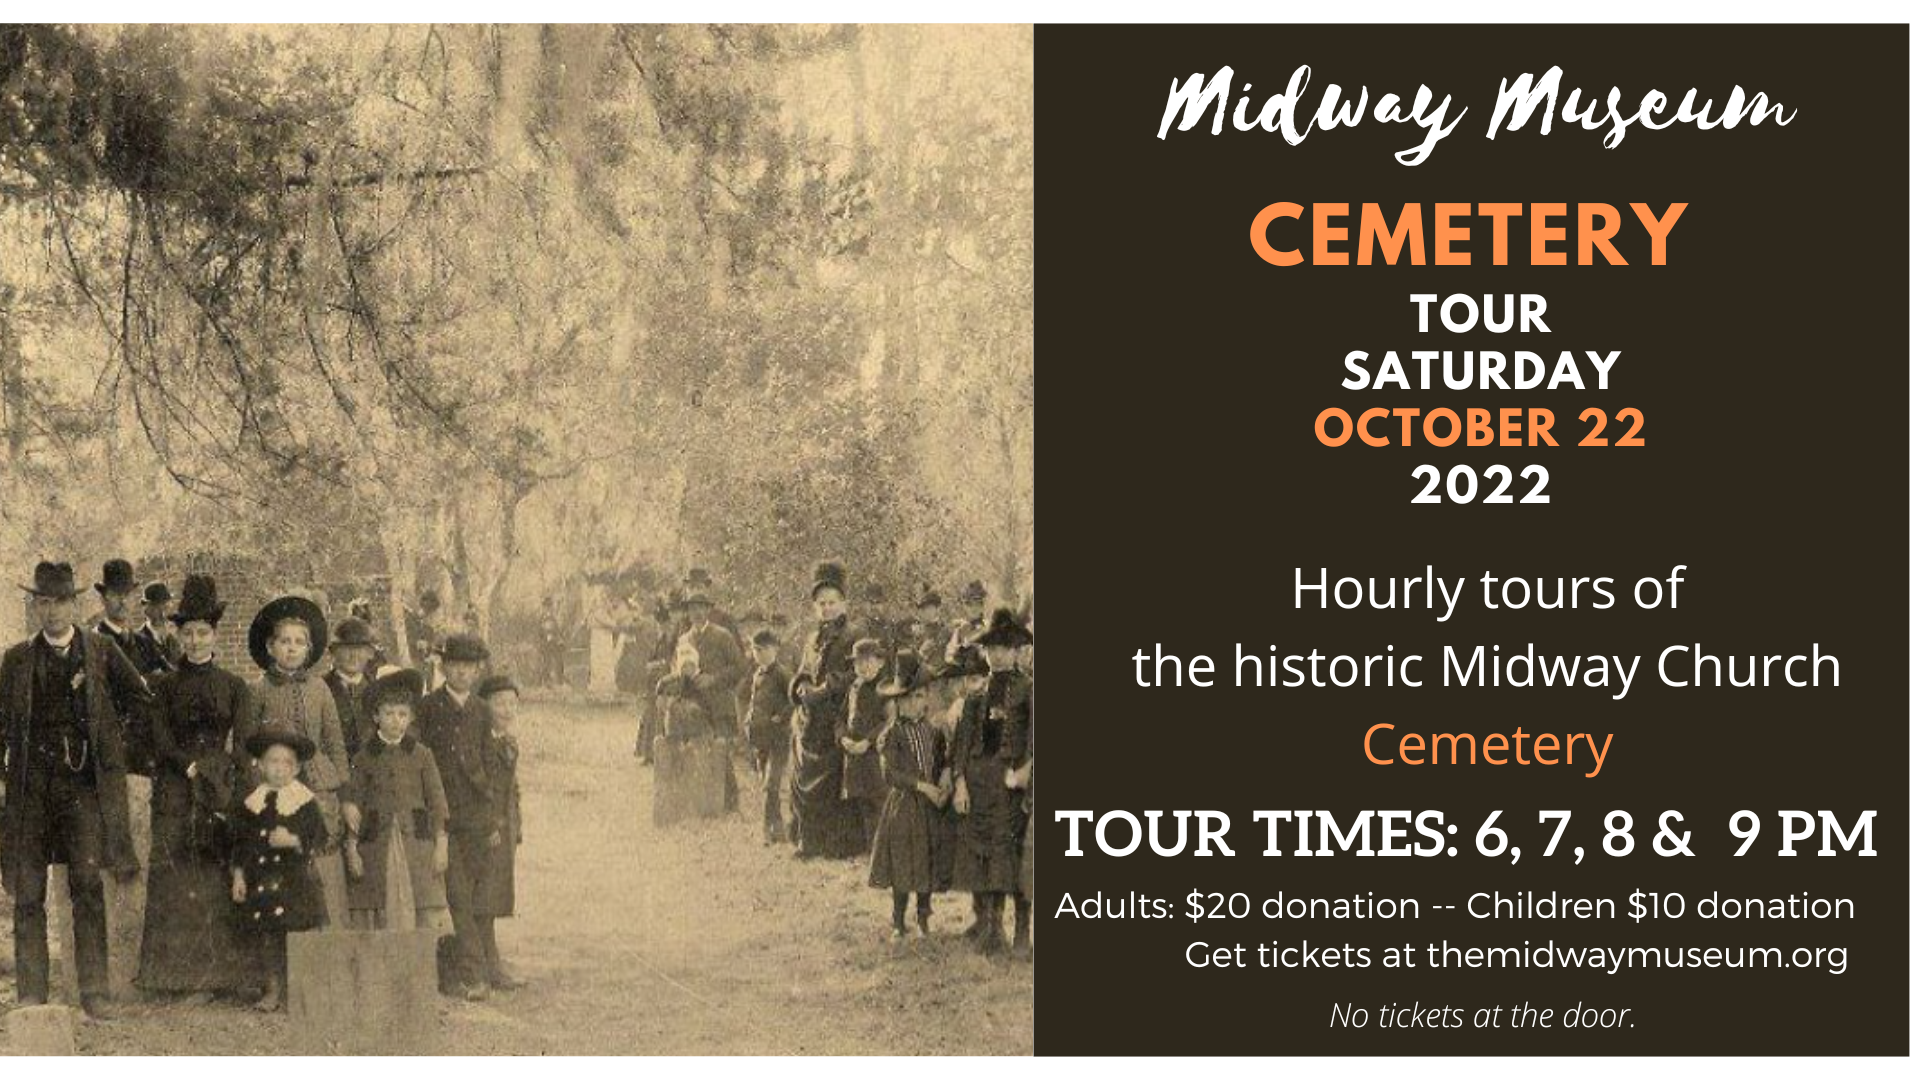 Flyer for Midway Museum Cemetery Tour